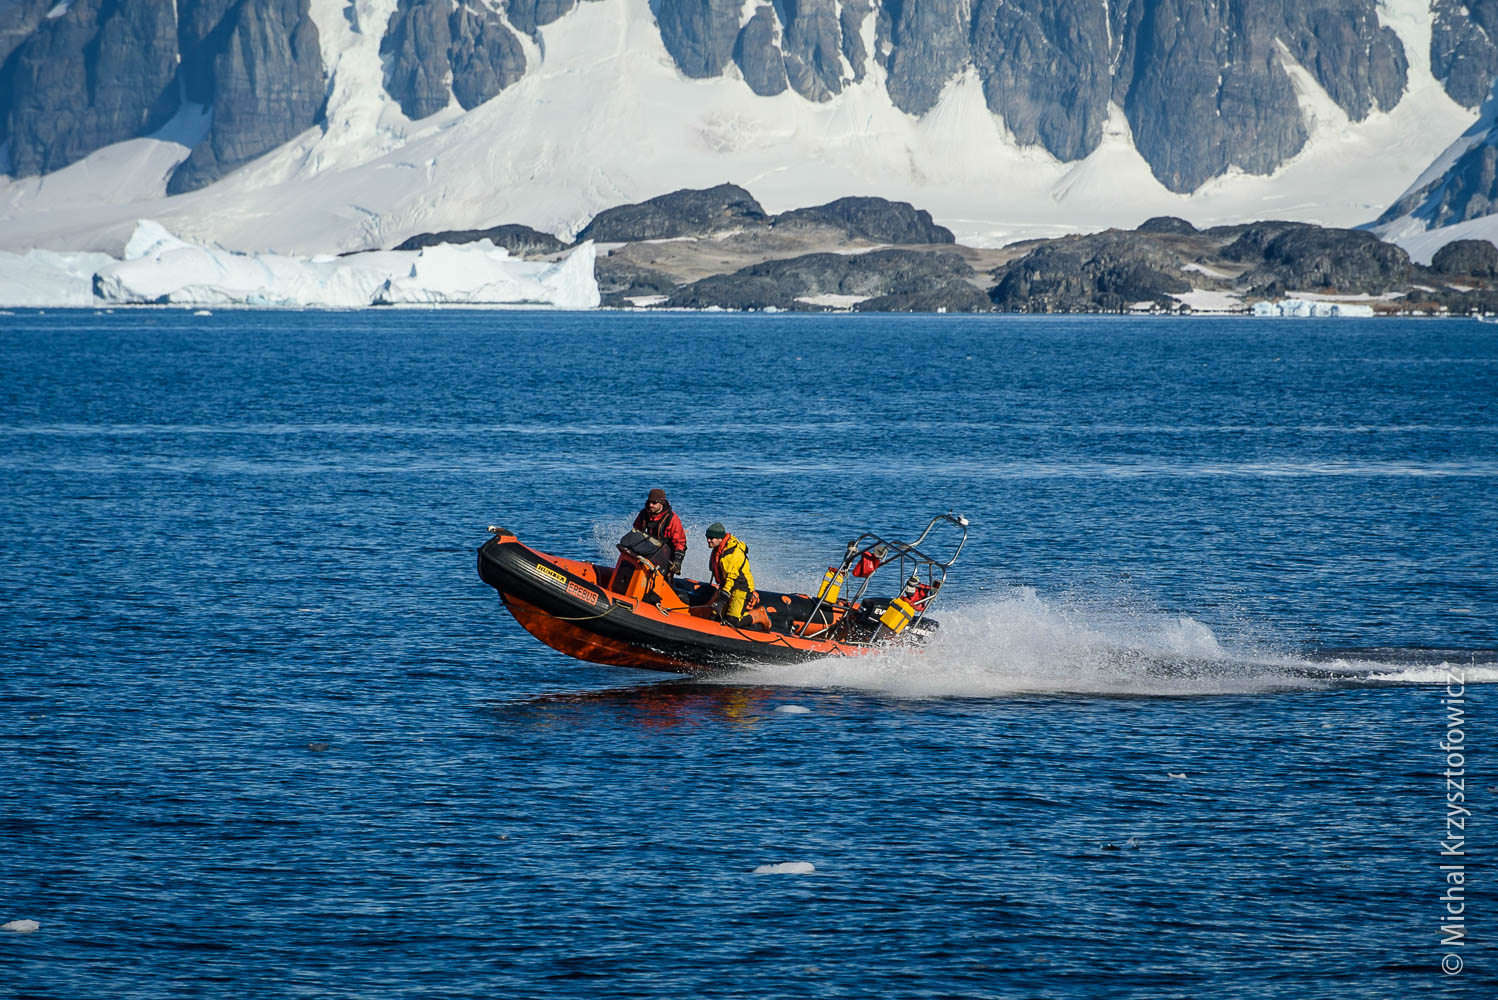 Boat returning to base after SAR duty